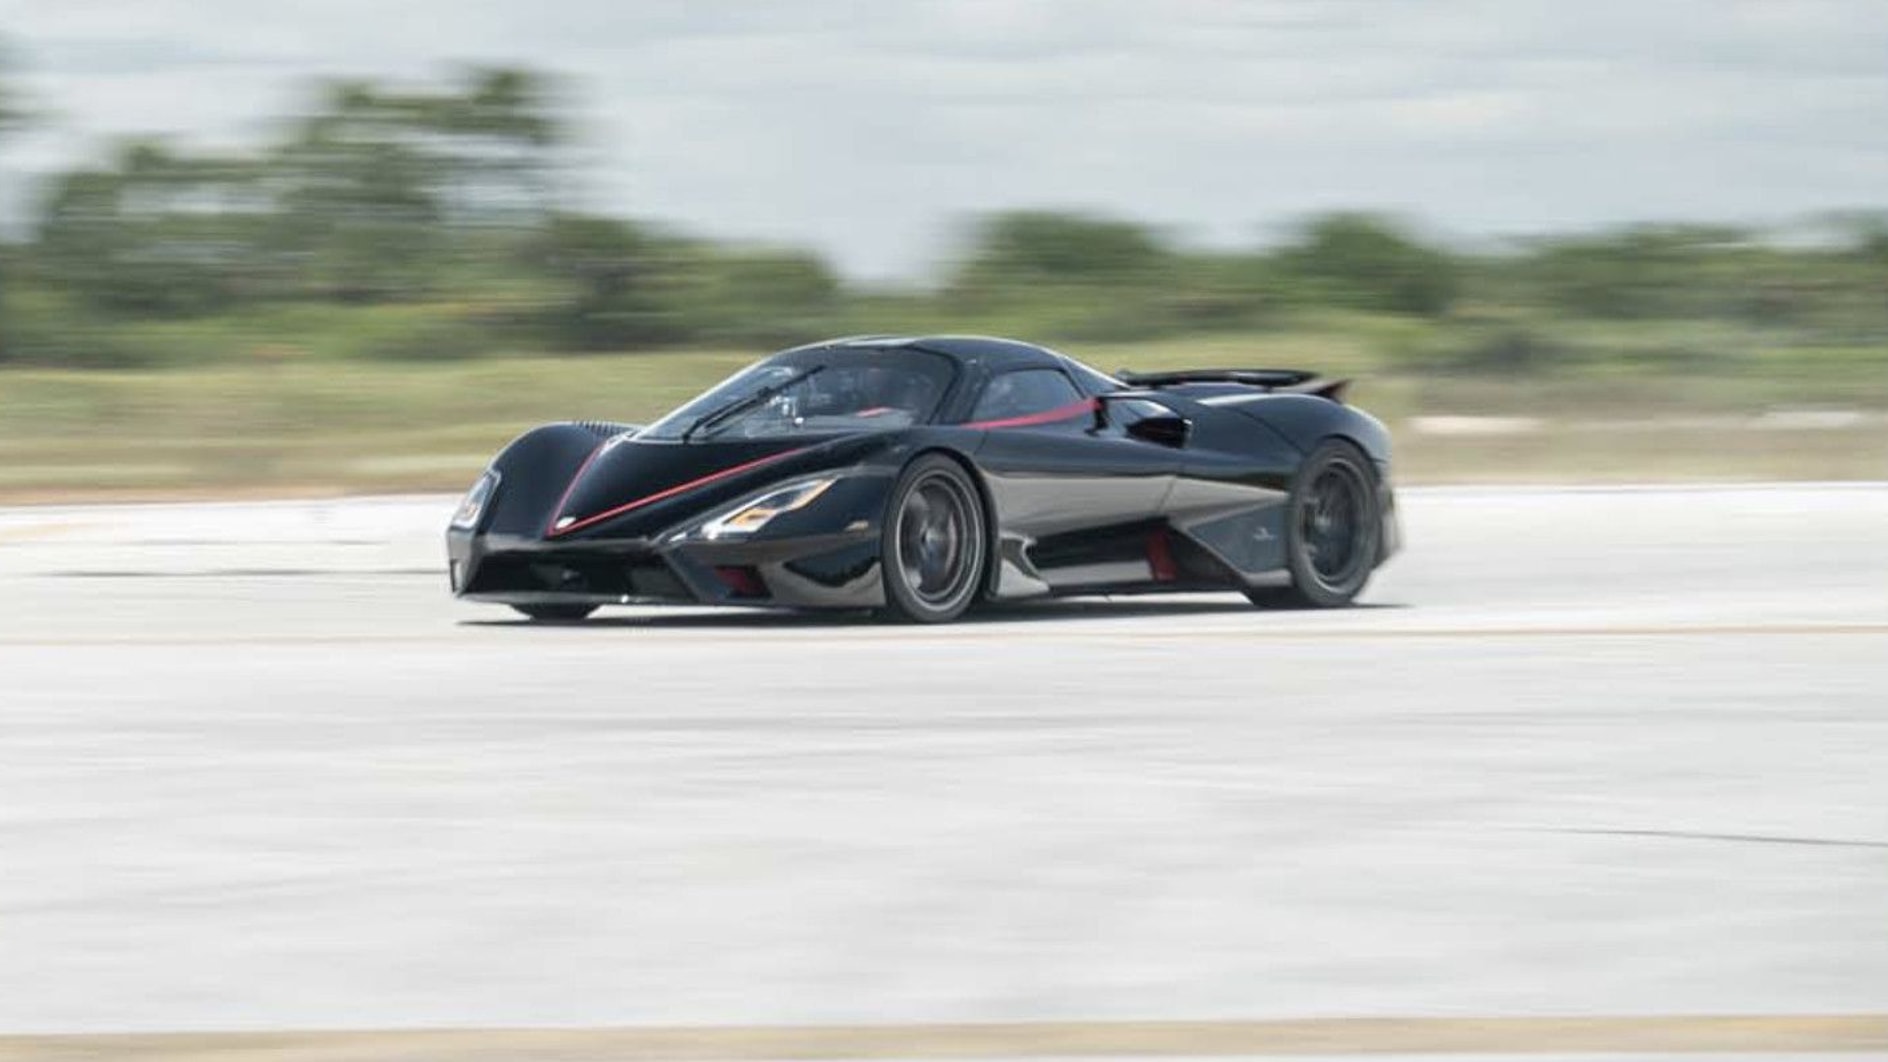 2021 SSC Tuatara hits 295 mph during speed record attempt, May 2022